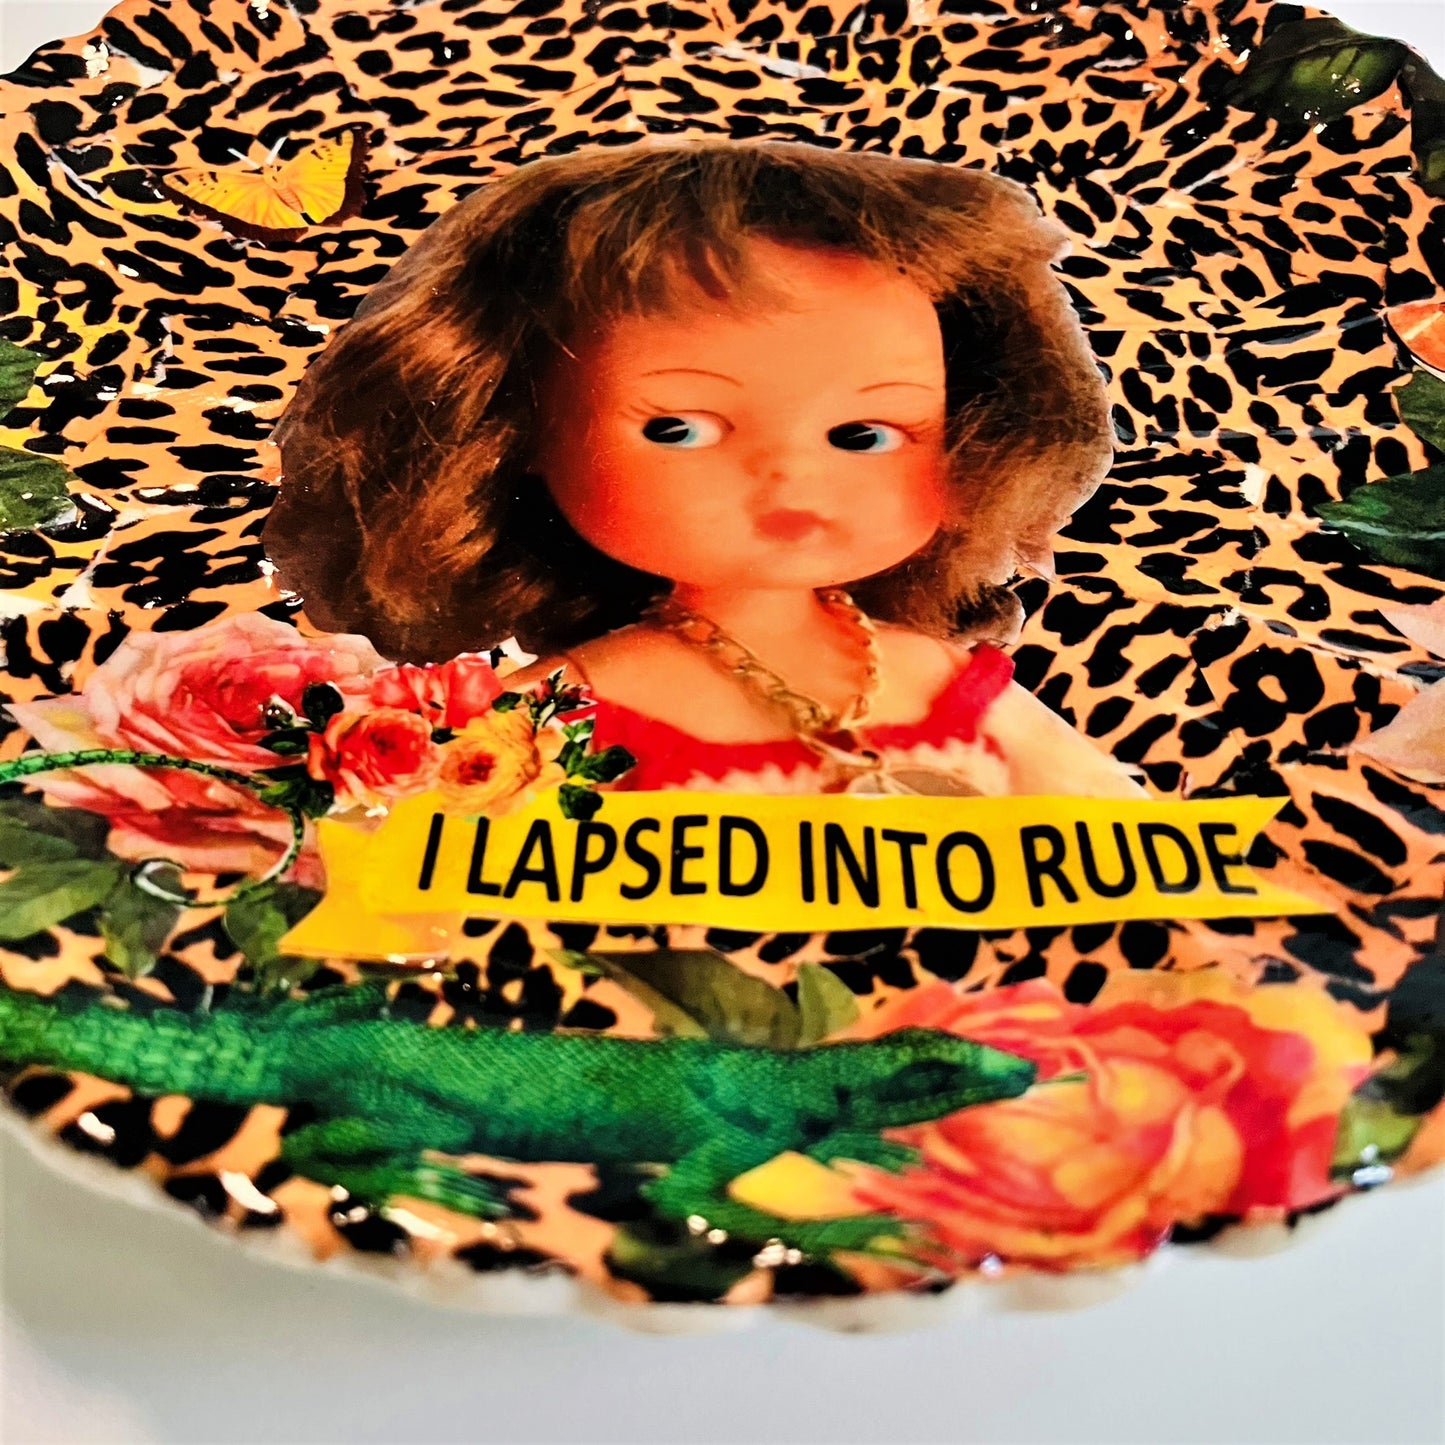 Orange Leopard Print Upcycled Wall Plate - "I Lapsed Into Rude" - by House of Frisson